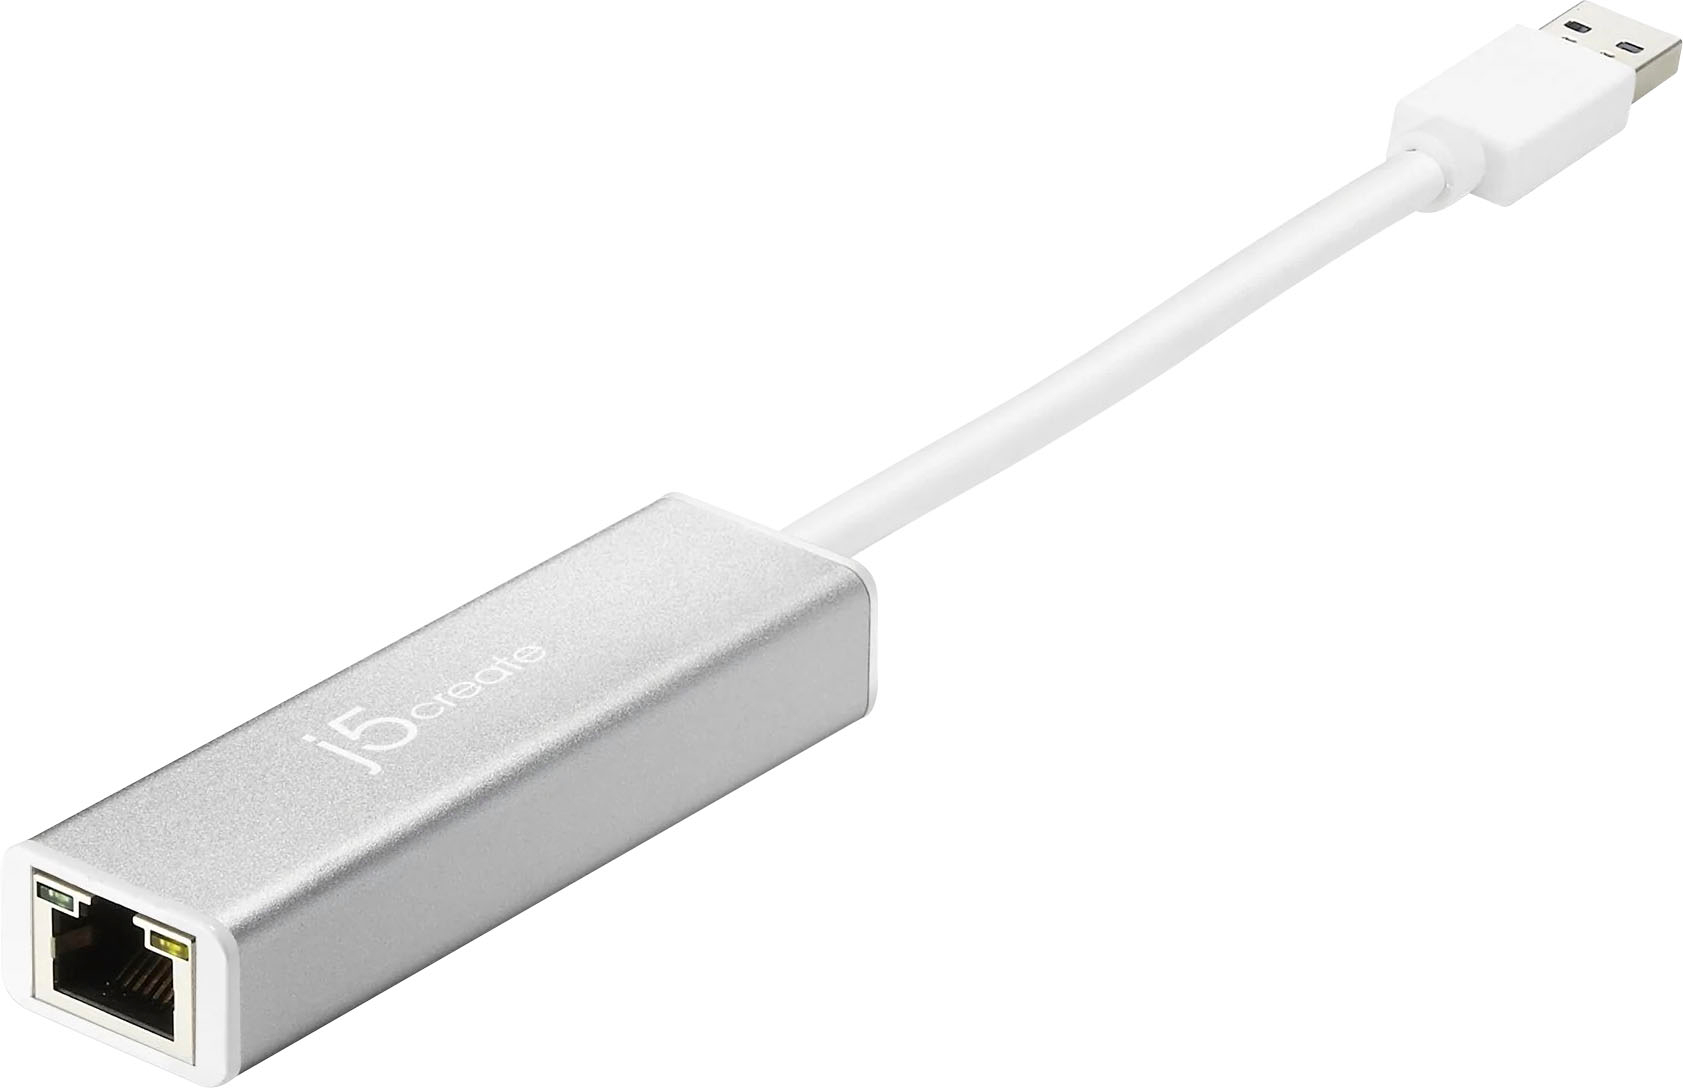 Angle View: j5create - USB 3.0 Gigabit Ethernet Adapter - Silver